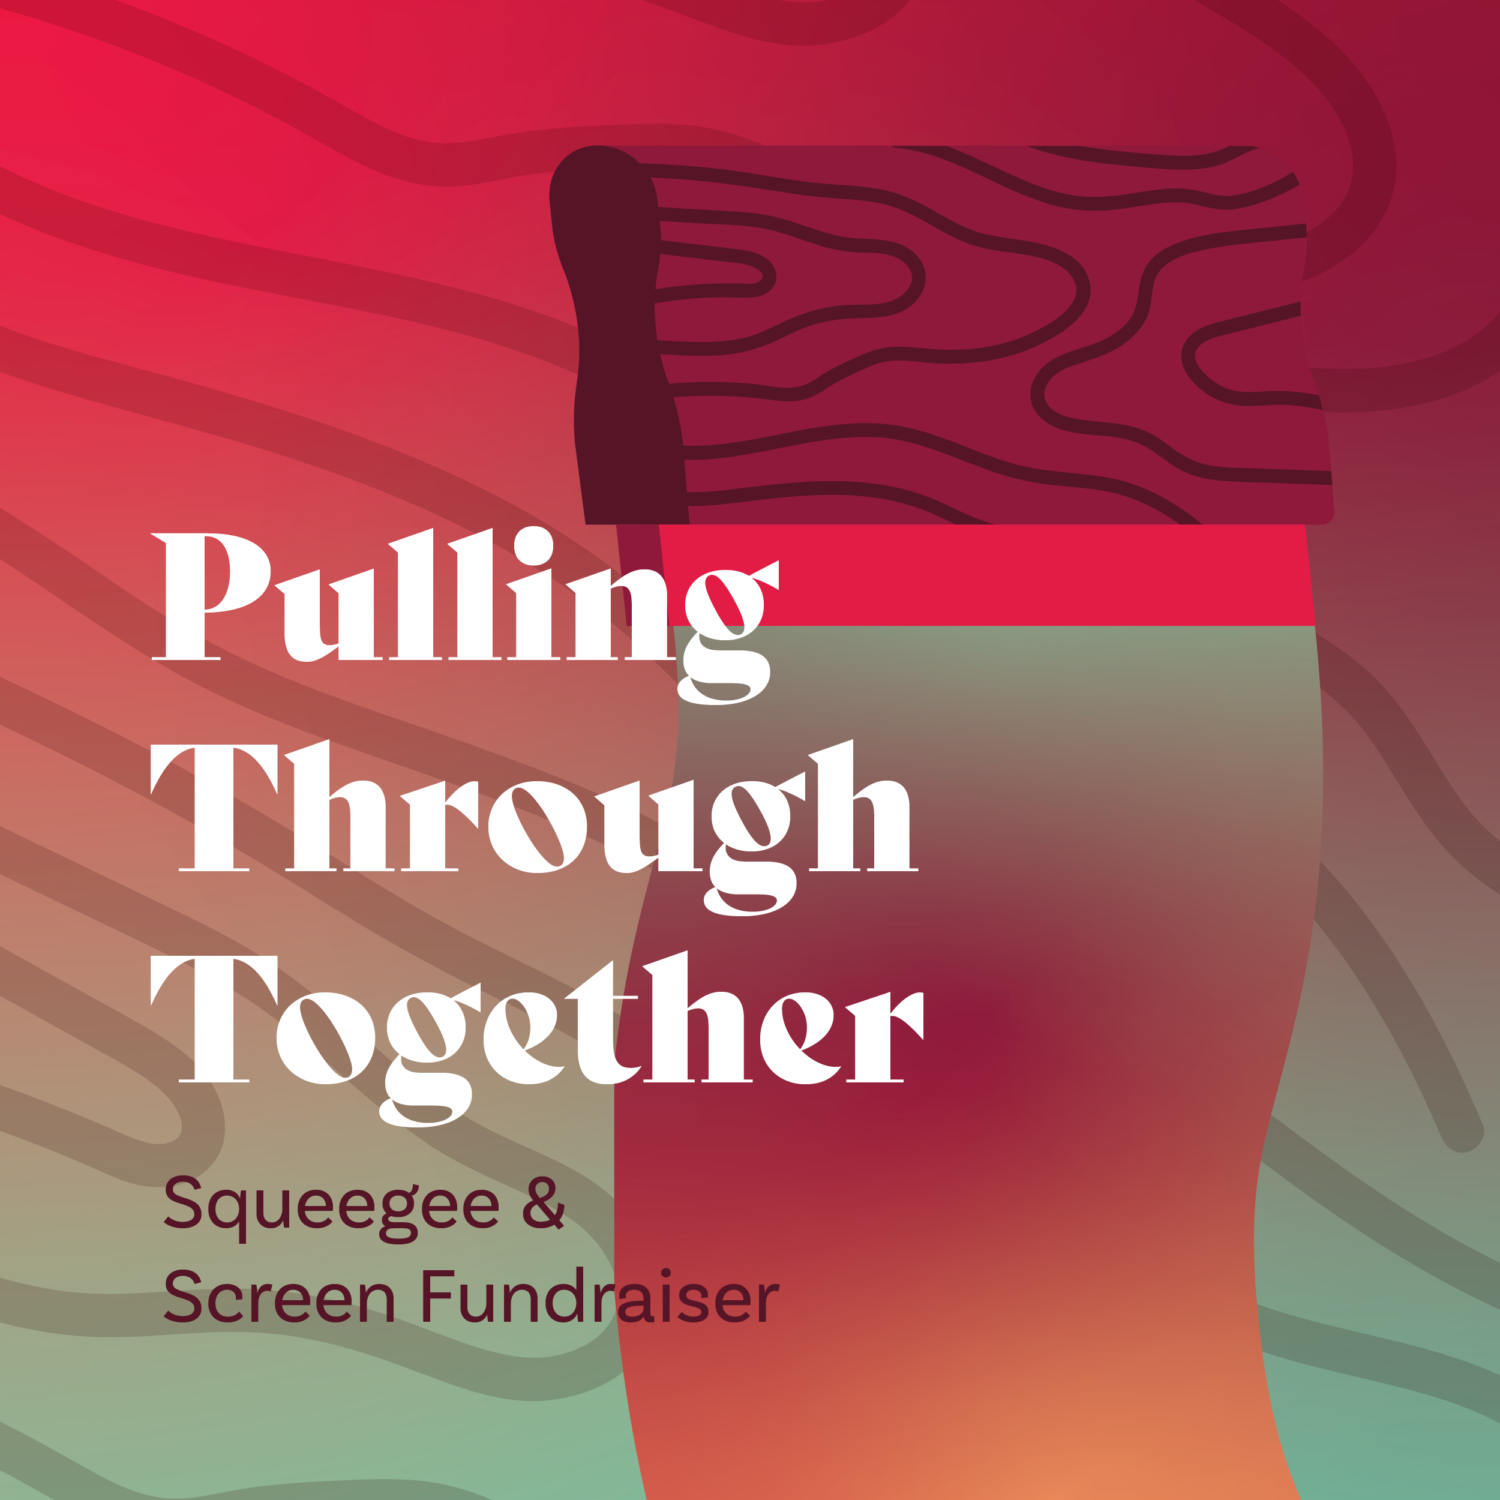 Squeegee fundraiser graphics main